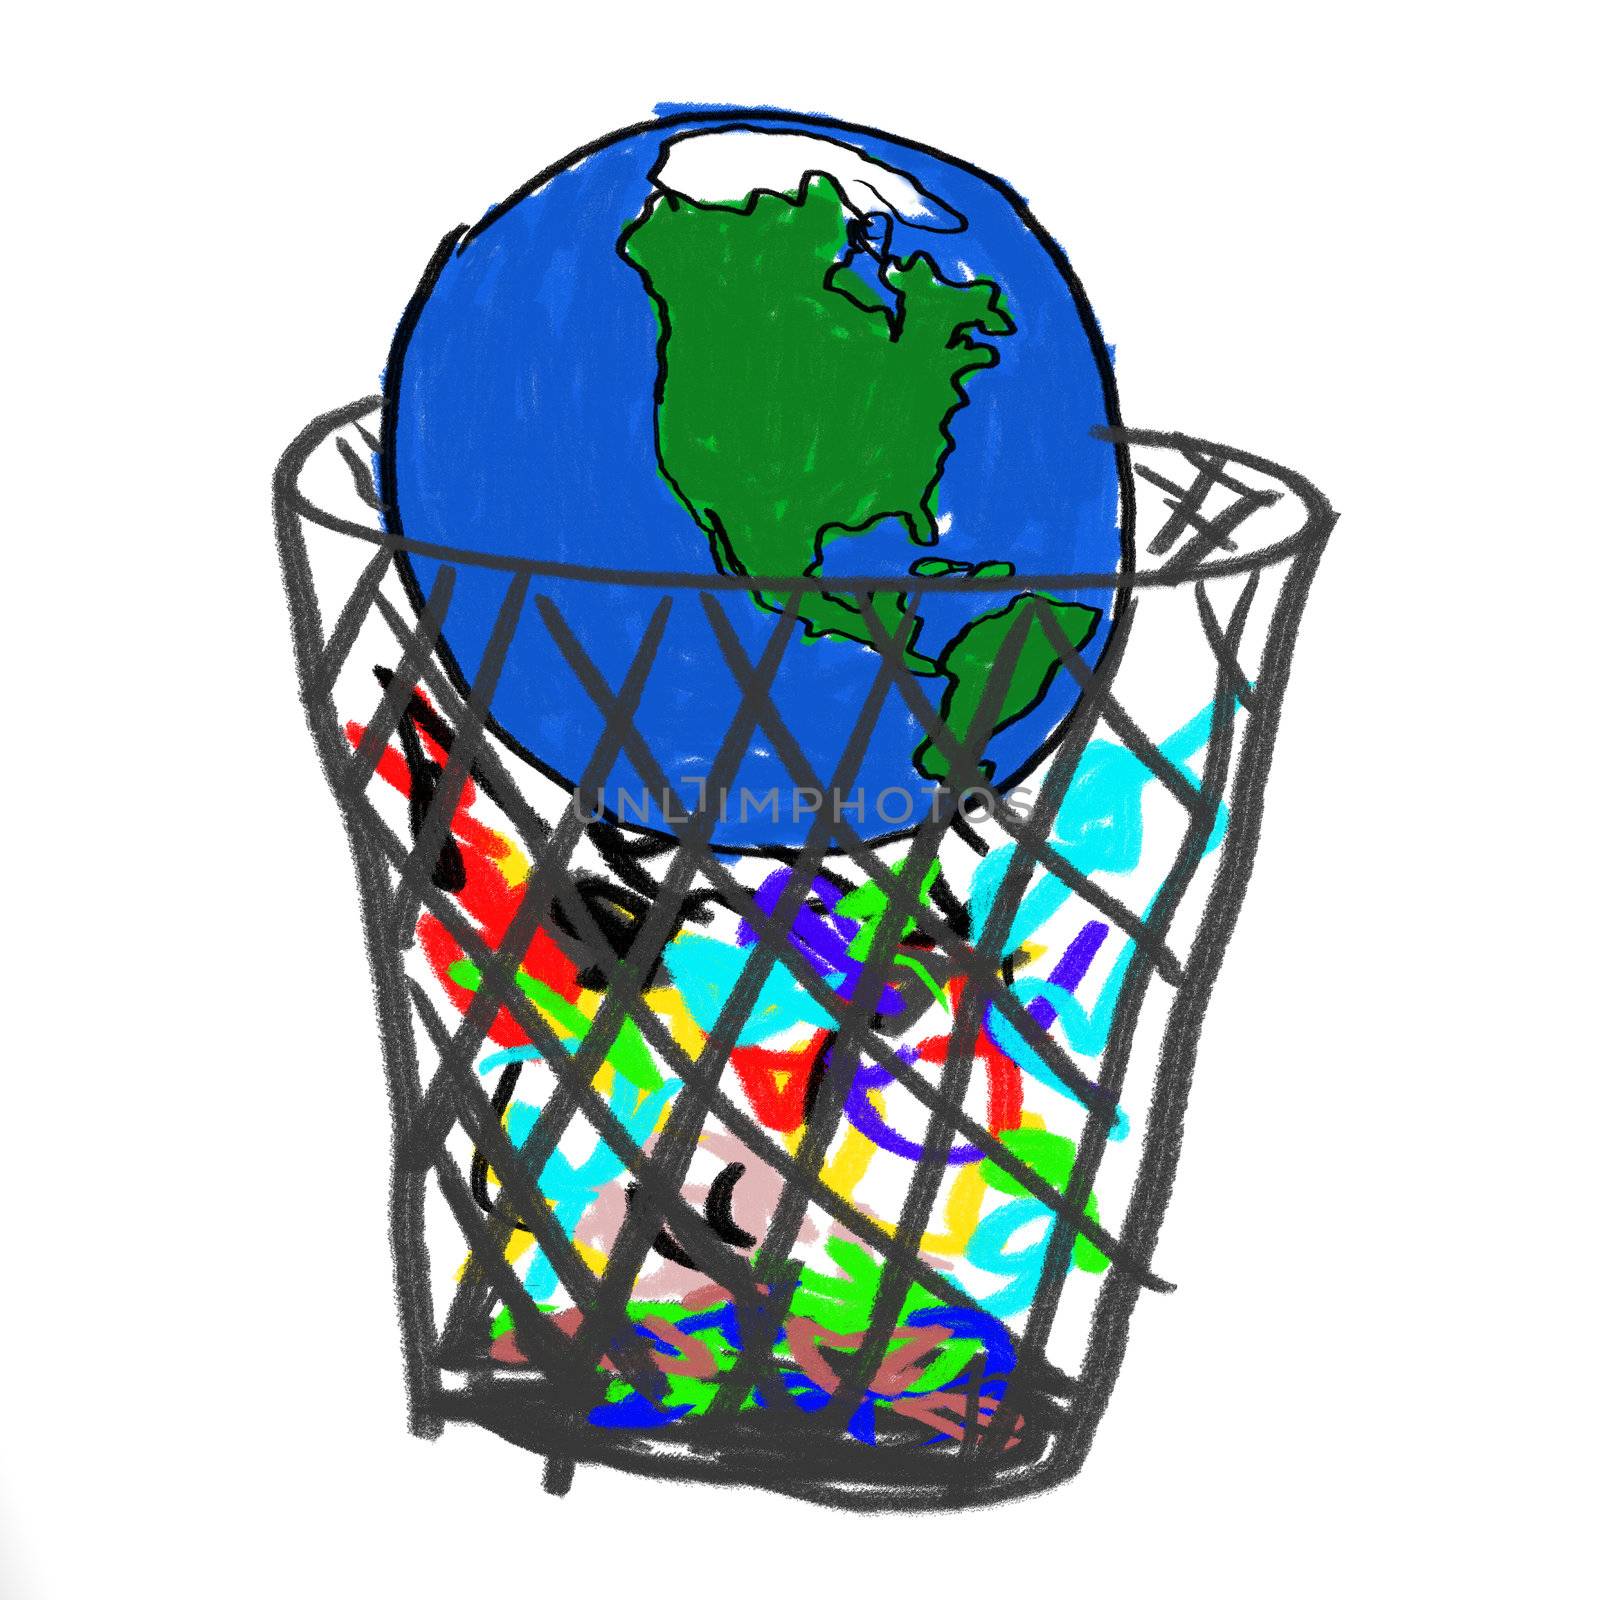 A childlike drawing of the earth in the garbage